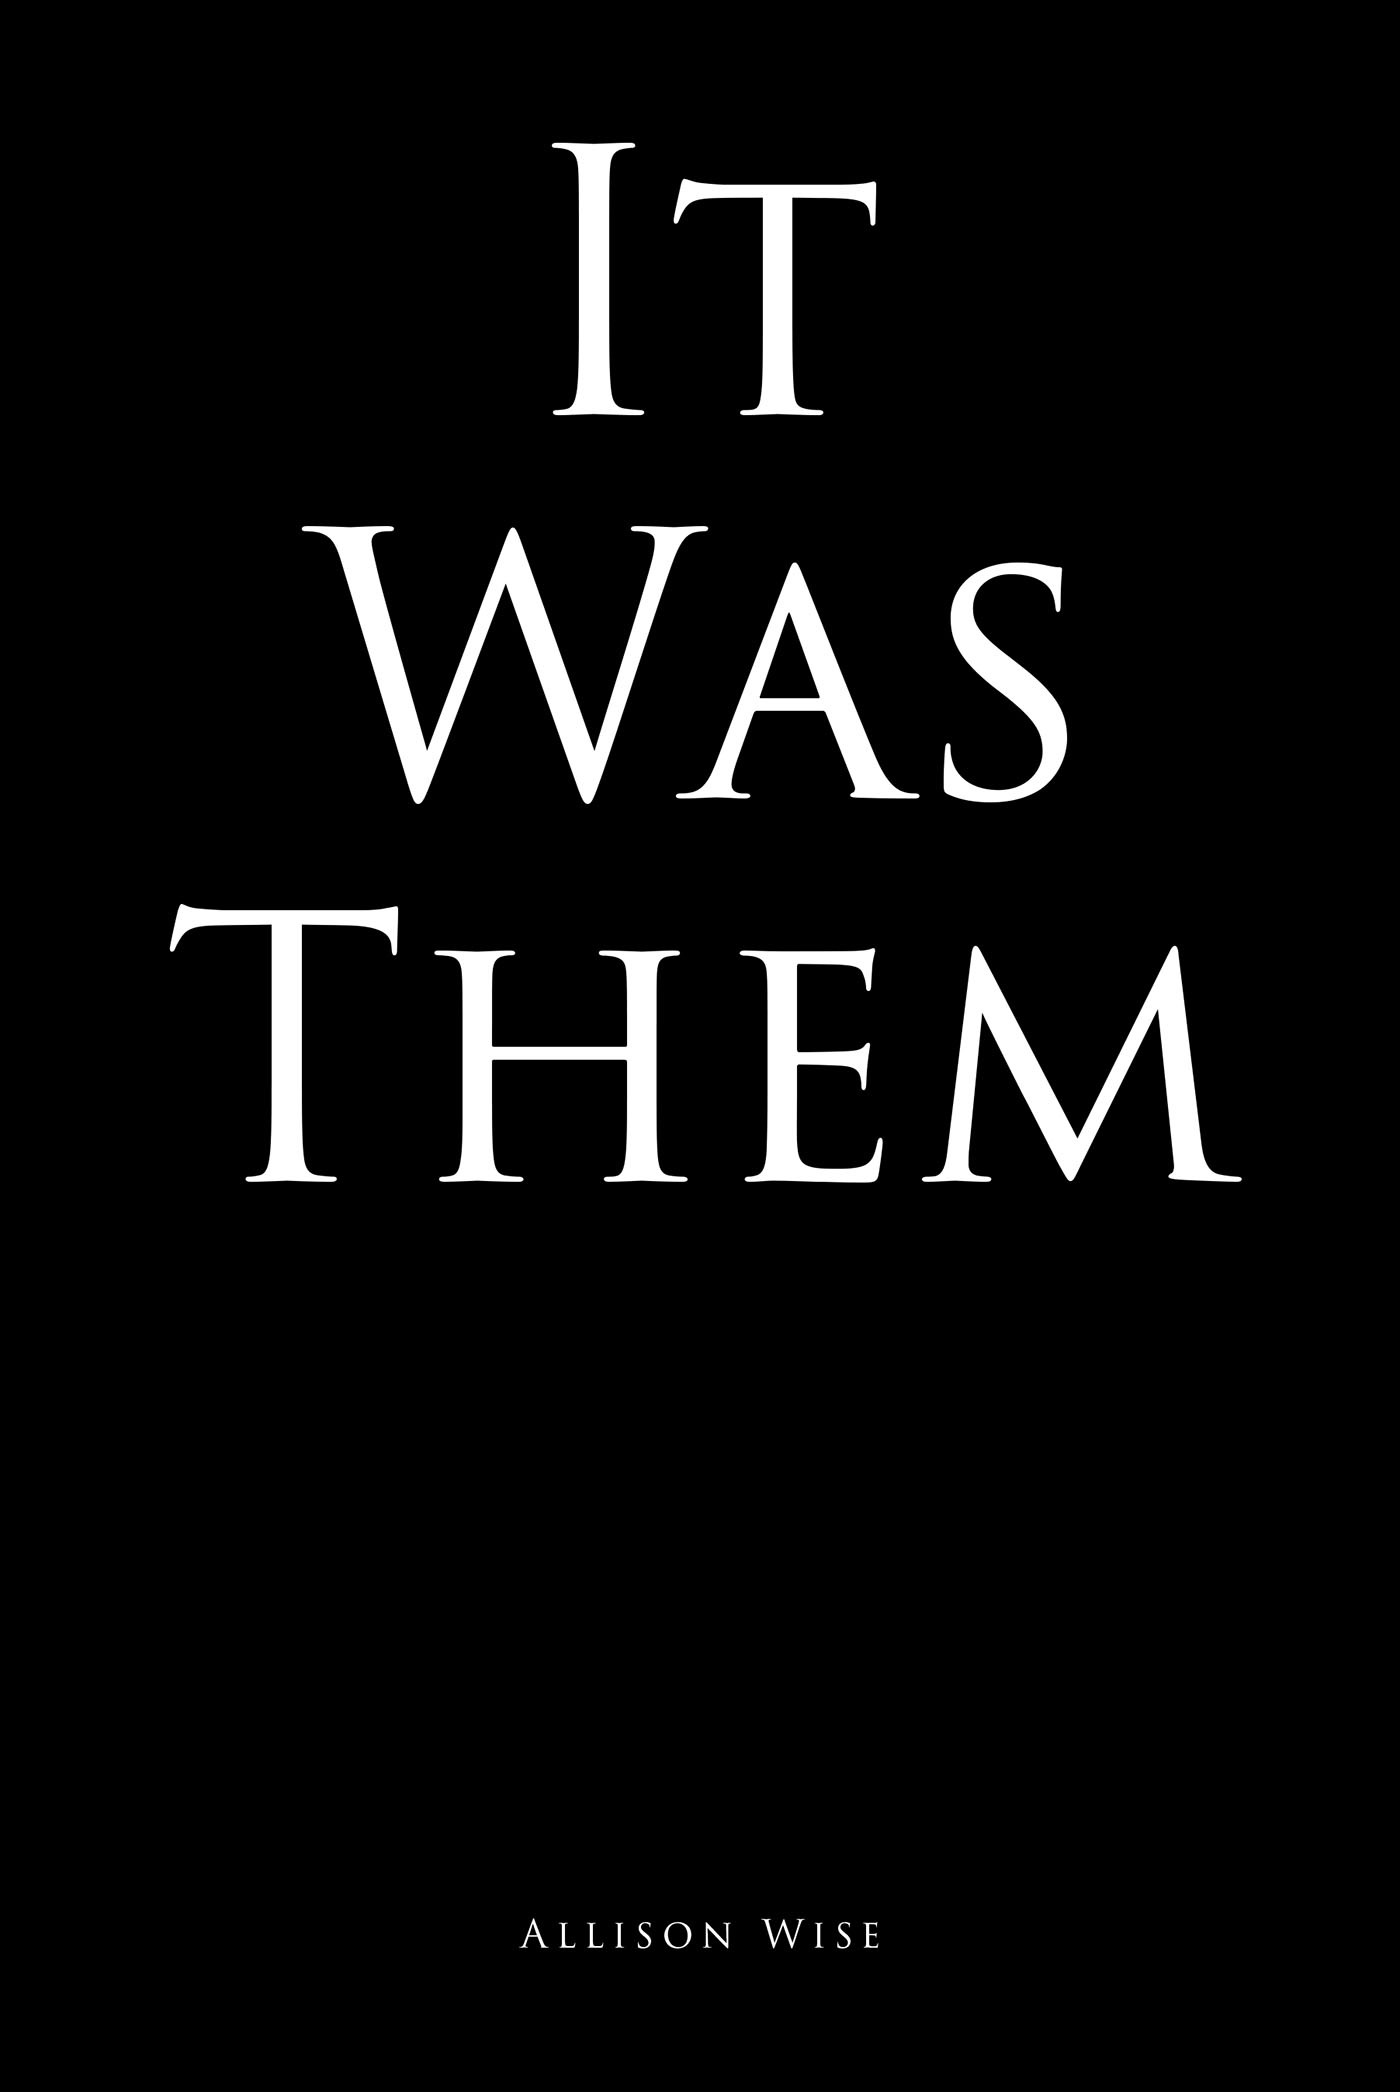 Allison Wise’s New Book, "It Was Them," is a Spellbinding, Action-Packed Narrative Set in a World Ravaged by the Effects of War, Now Facing an Attack from the Undead